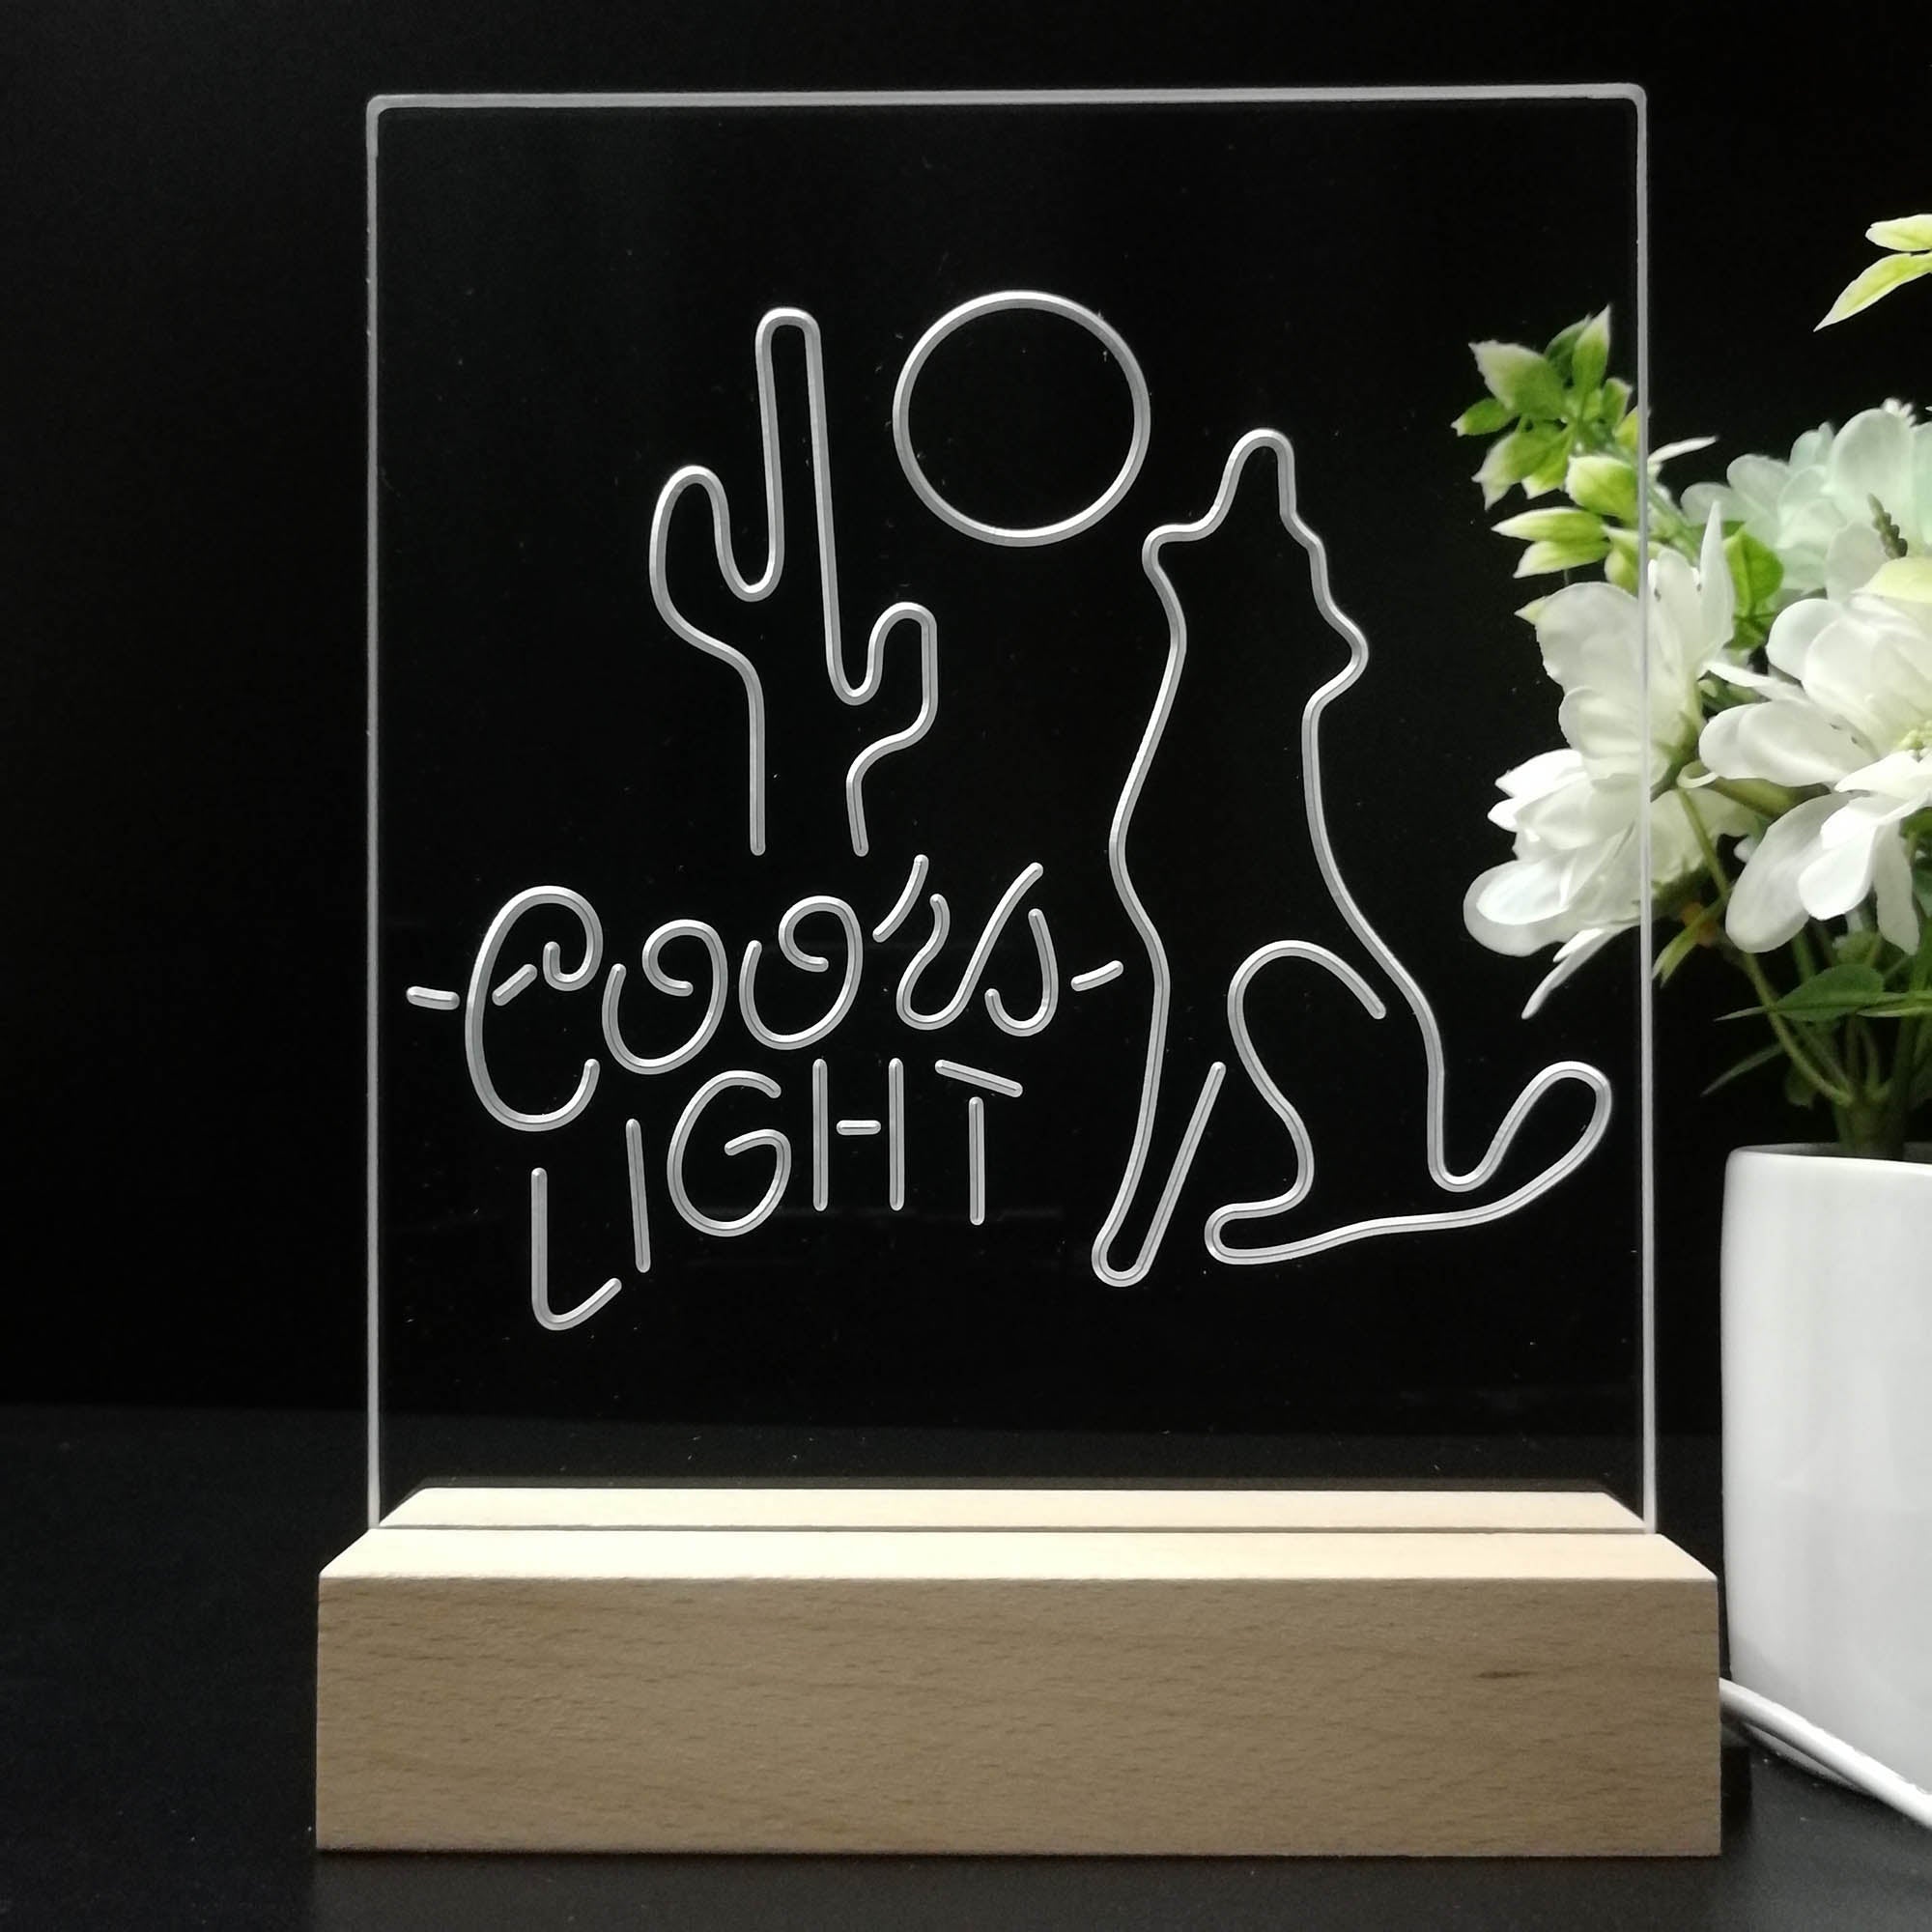 Coors Light Coyote Moon Night Light LED Sign